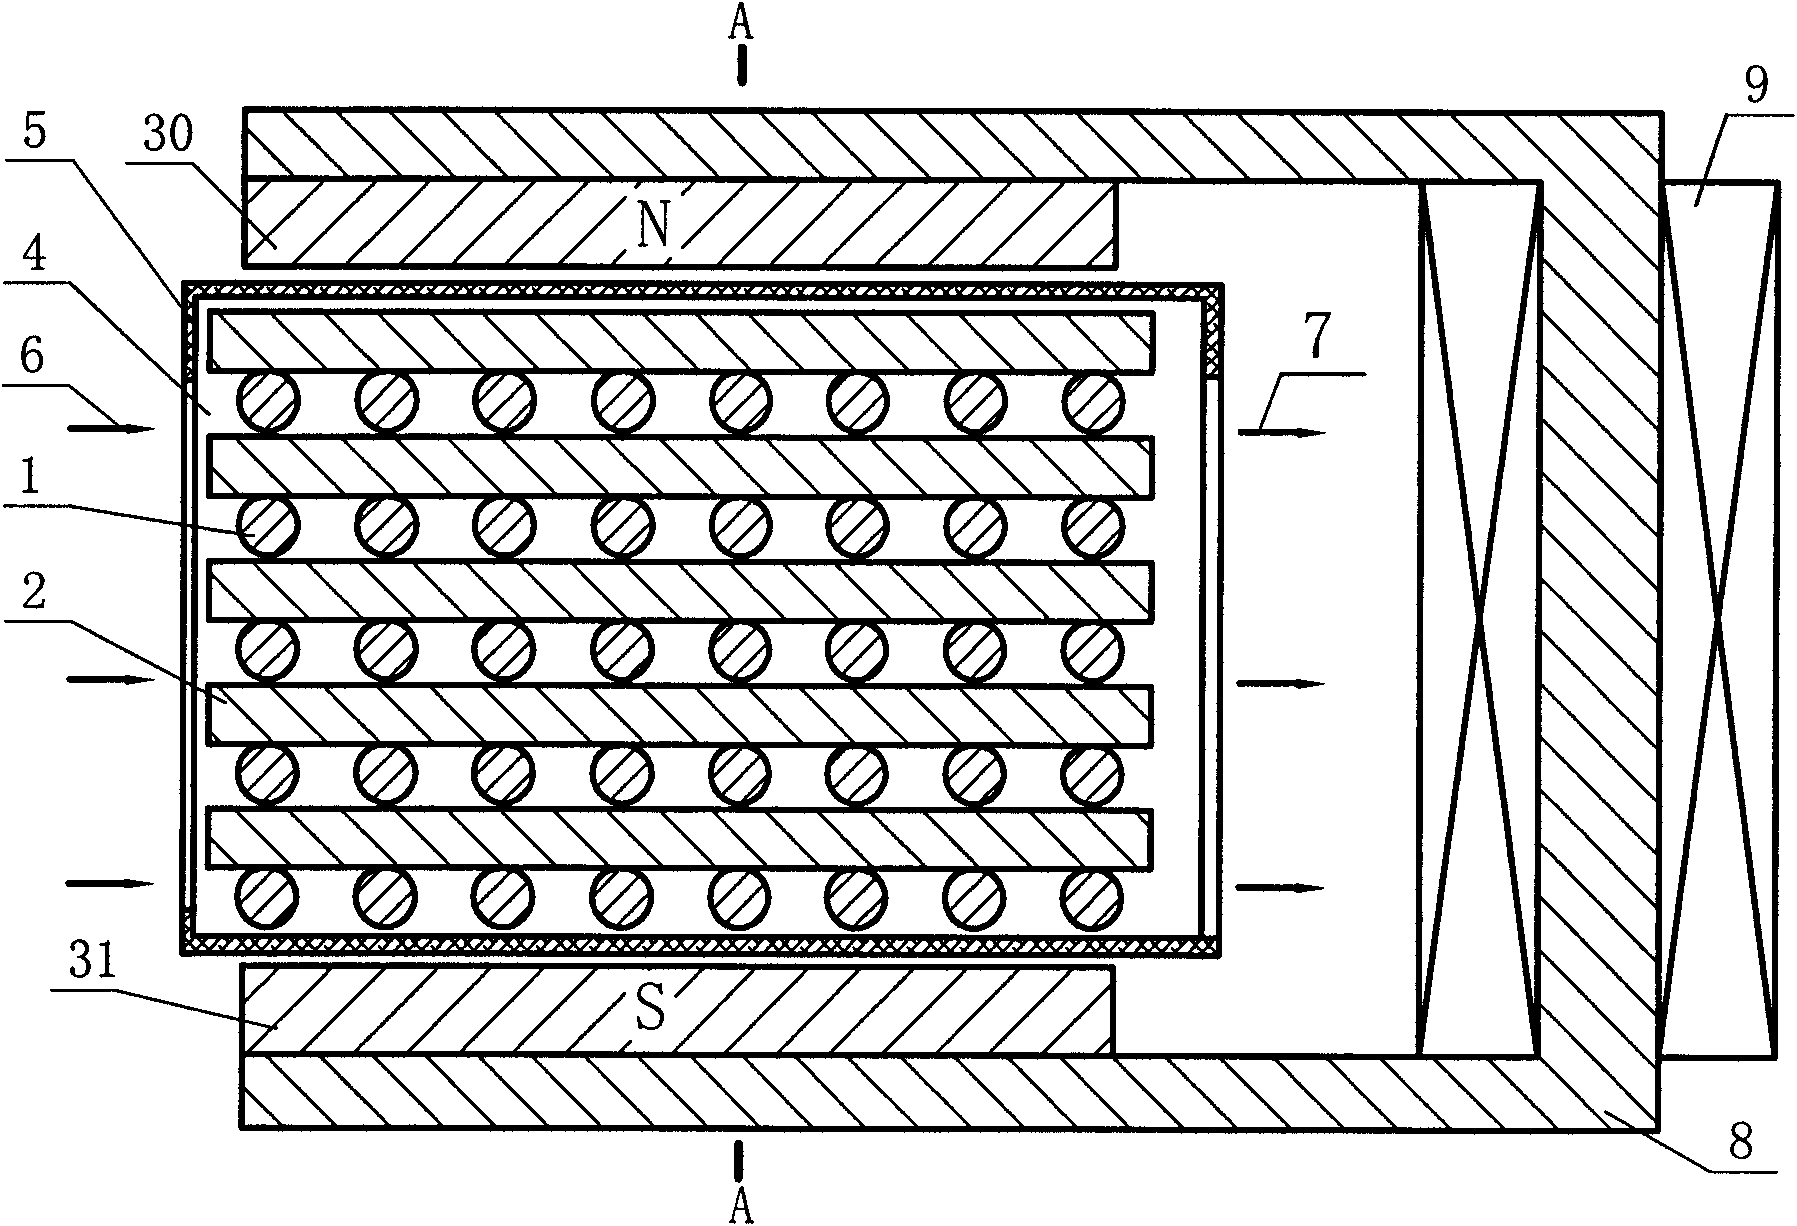 Magnetic fluid sieving device